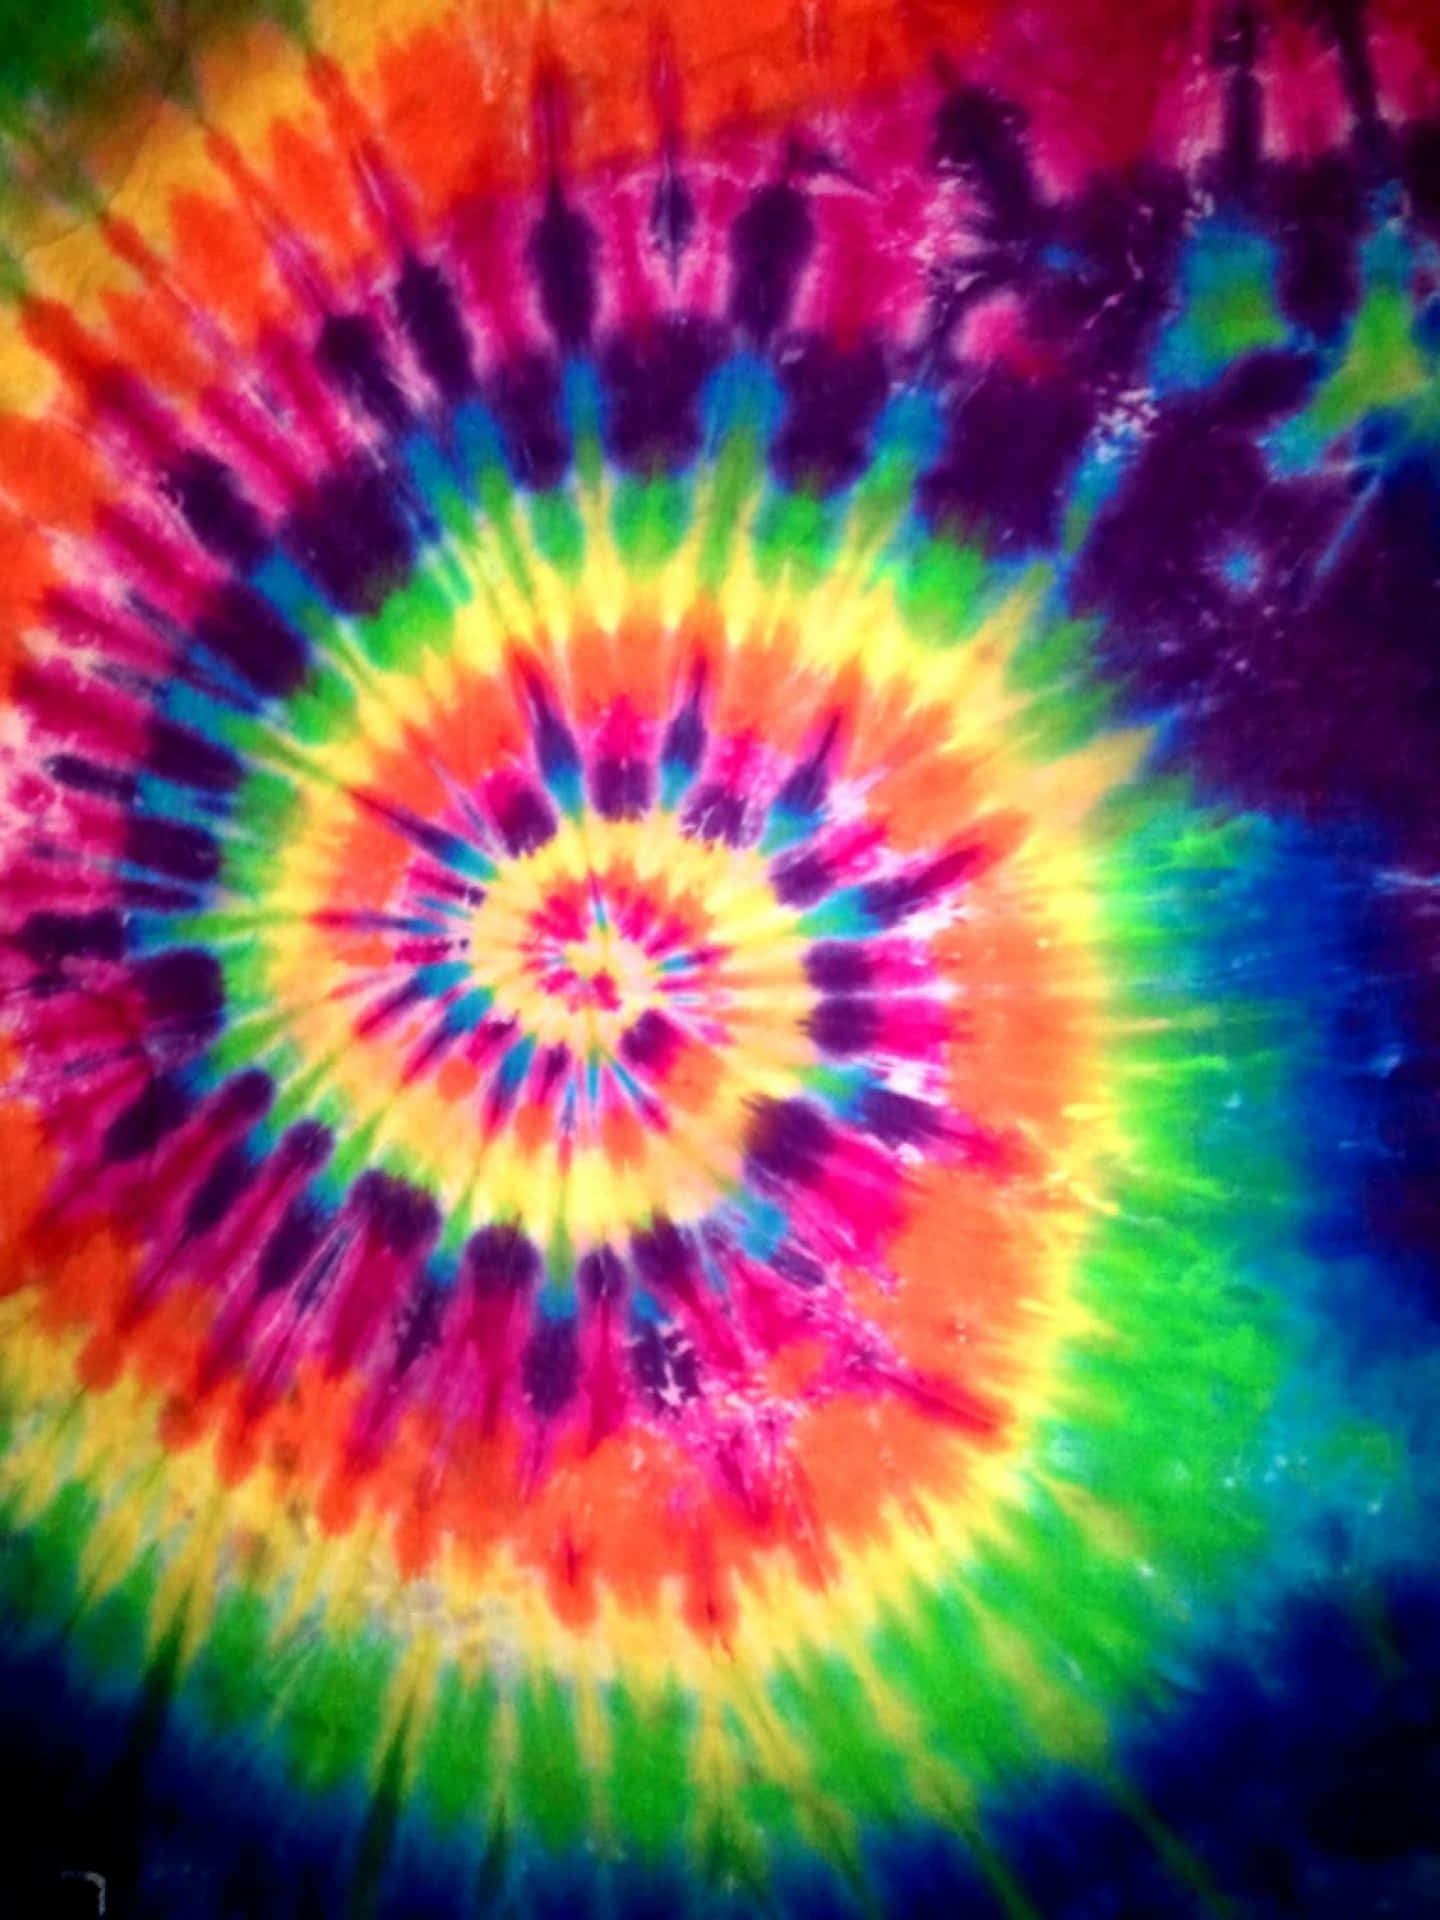 Download A colorful and vibrant high resolution tie dye pattern